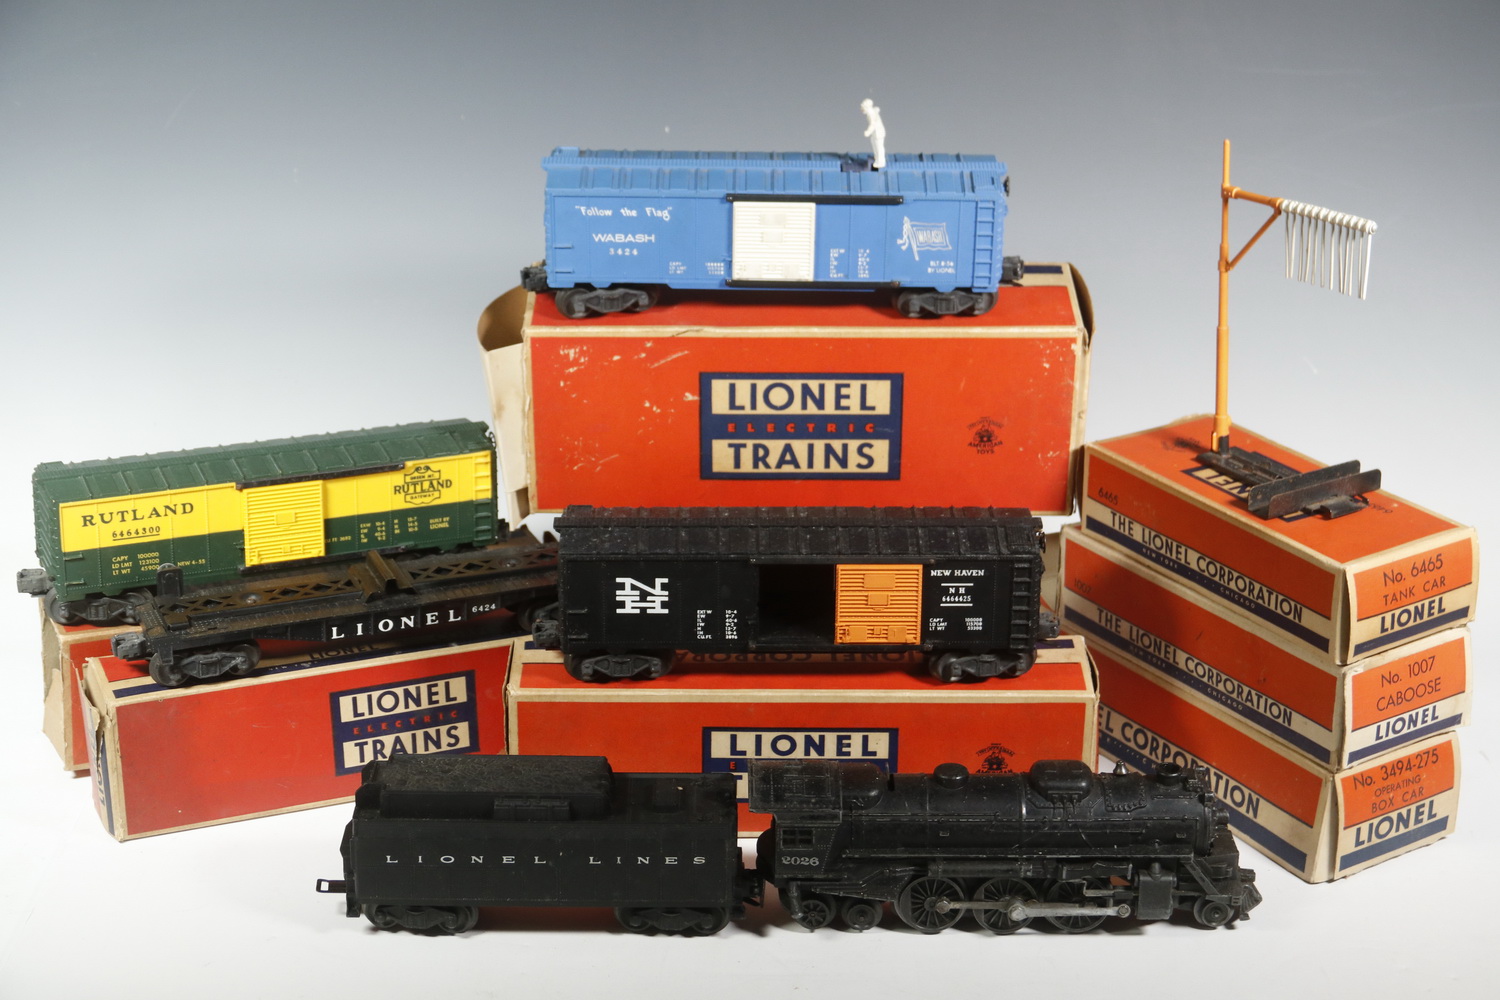  9 LIONEL TRAIN CARS IN BOXES 2b3610